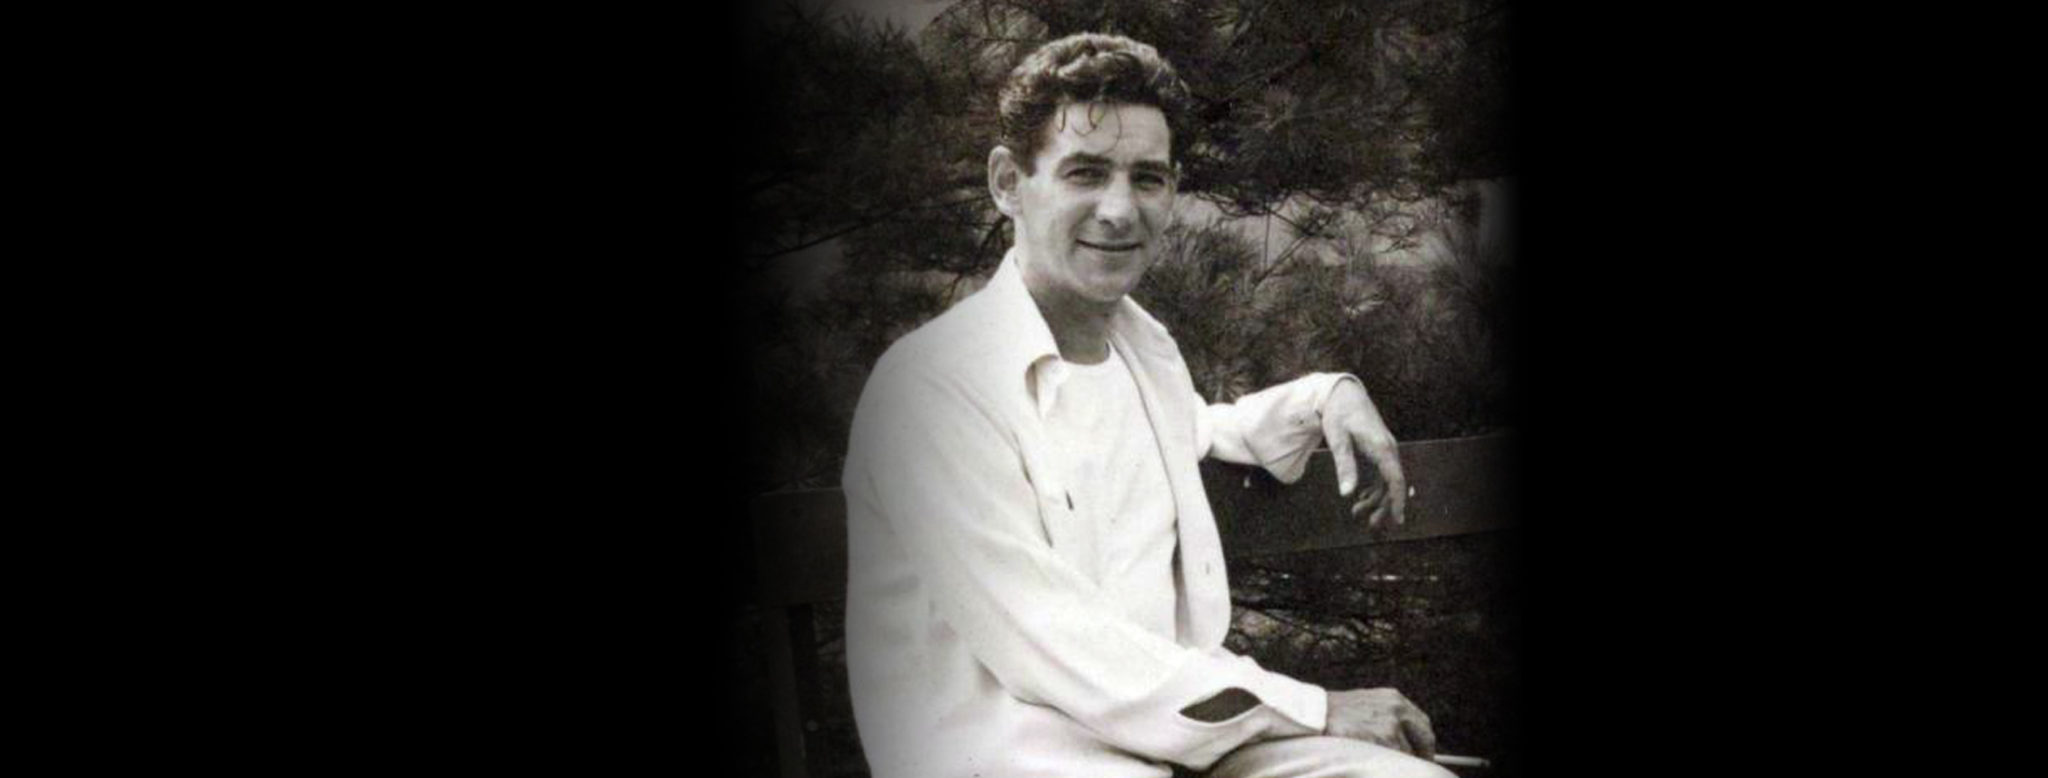 Leonard Bernstein at Tanglewood, 1947 (Credit: Library of Congress, Music Division)